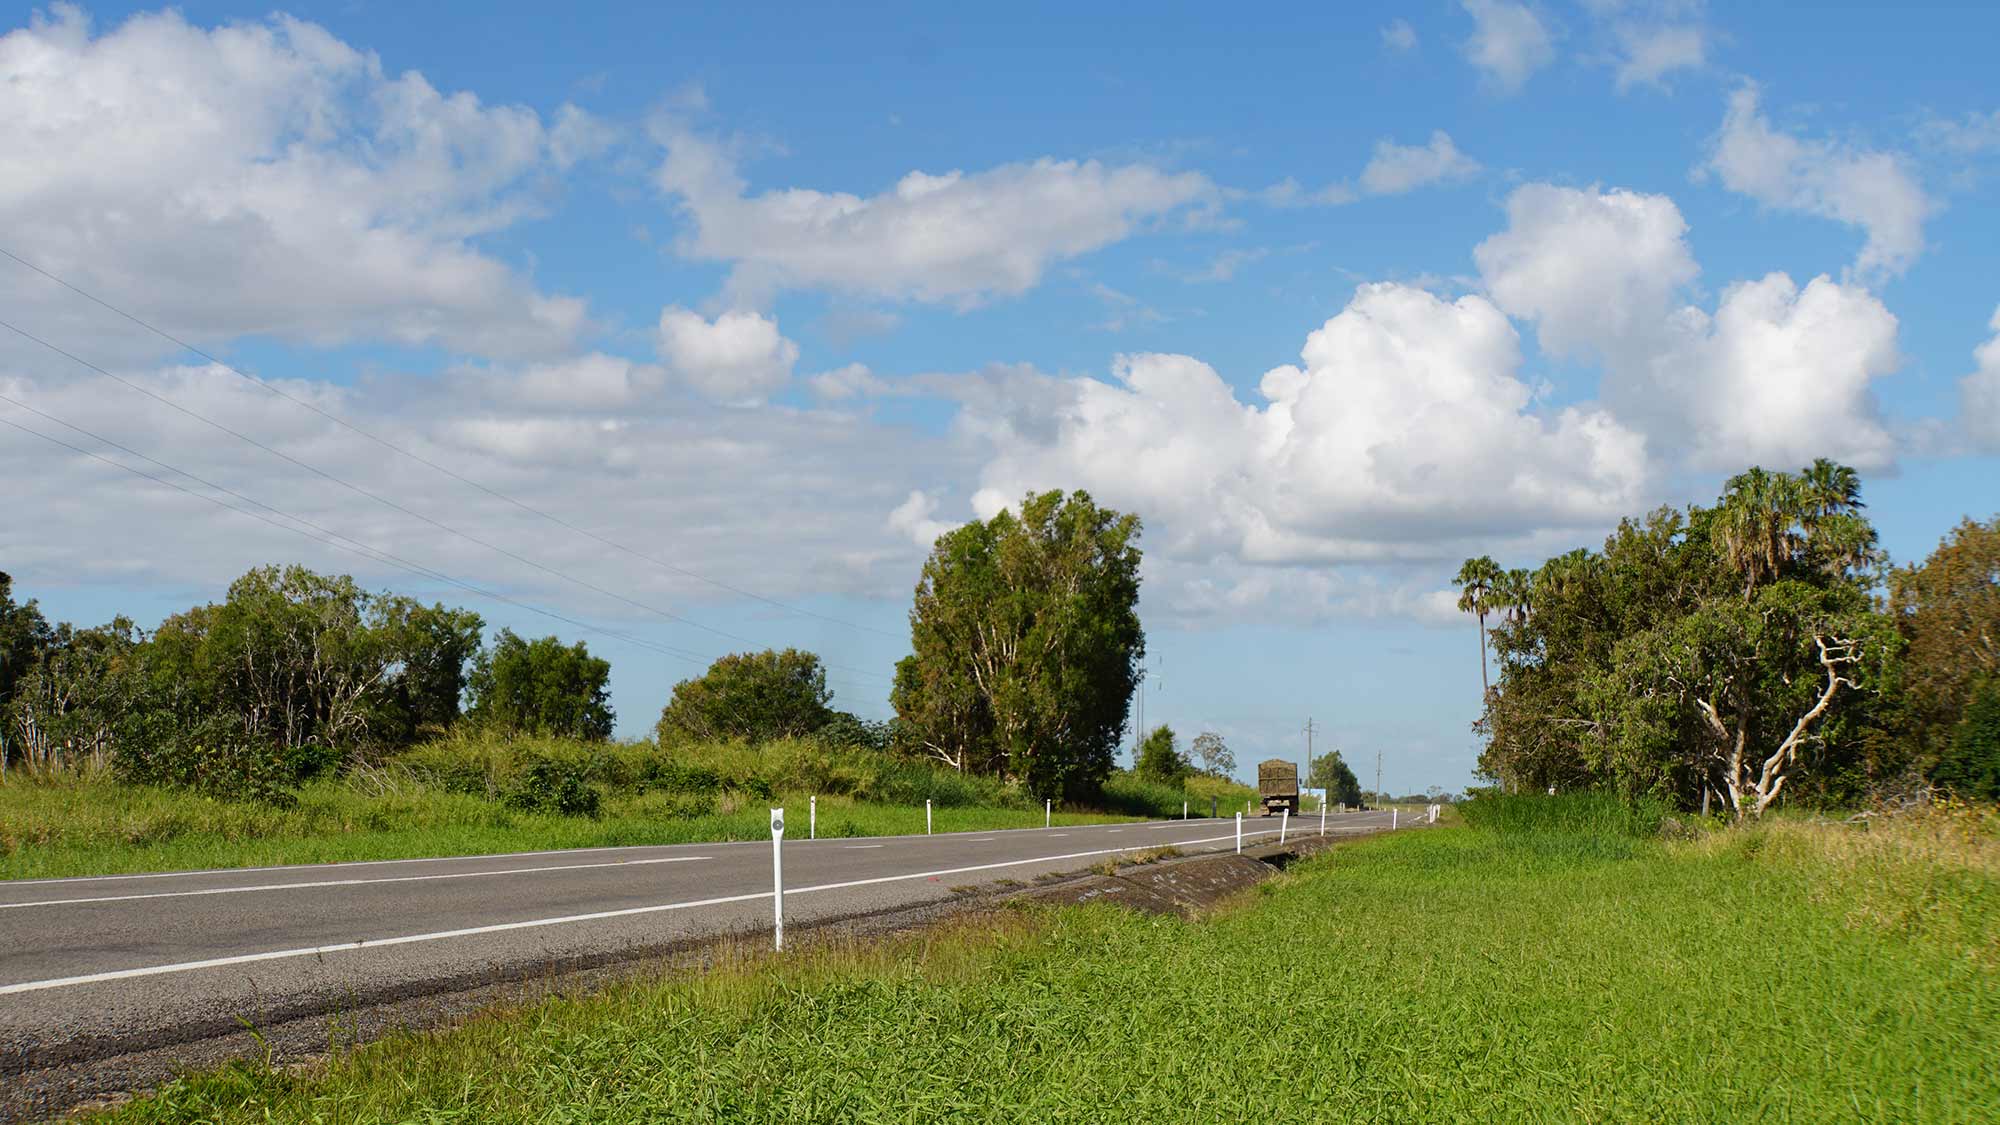 View along an existing section of the Haughton River Floodplain along the Bruce Highway